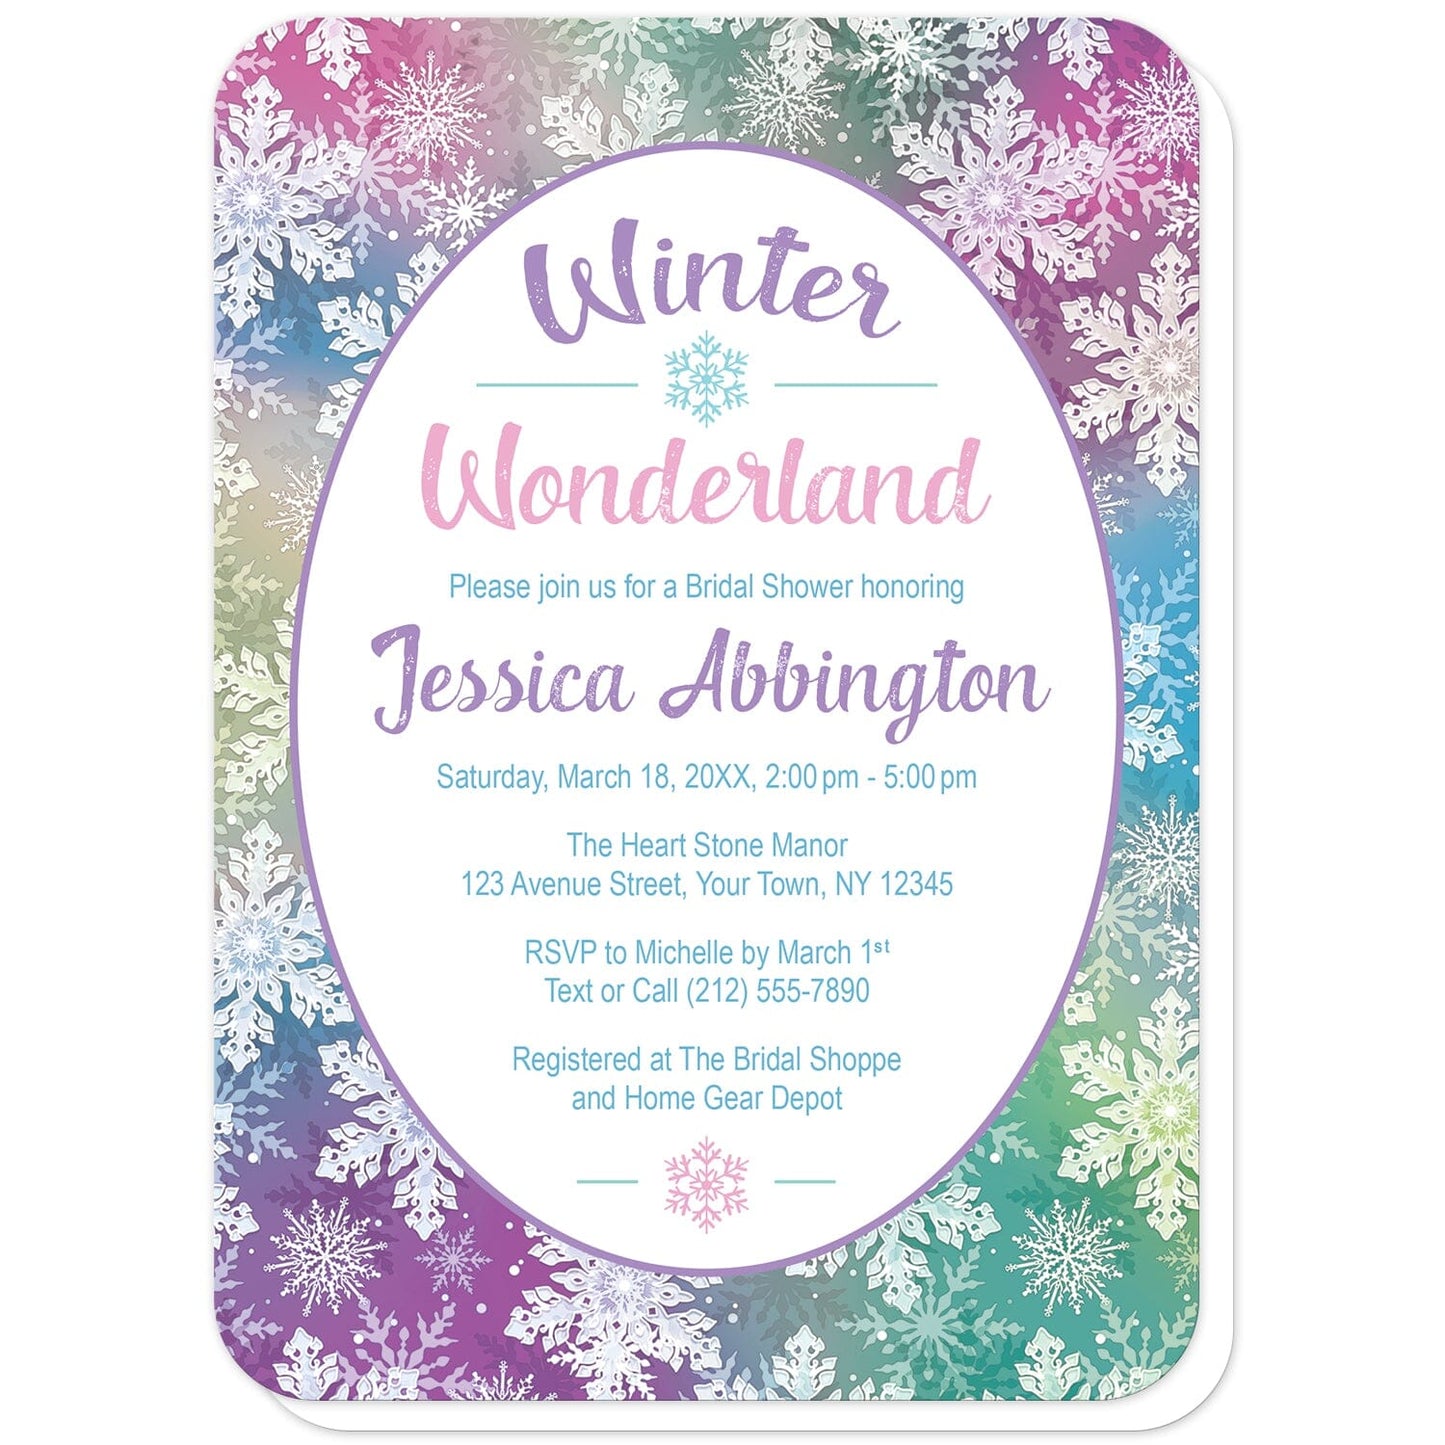 Rainbow Snowflake Winter Wonderland Bridal Shower Invitations (with rounded corners) at Artistically Invited. Beautifully ornate rainbow snowflake Winter Wonderland bridal shower invitations designed with your personalized bridal shower details custom printed in colorful text in a white oval frame design over a beautiful and ornate rainbow snowflake pattern with white snowflakes over a multicolored background.